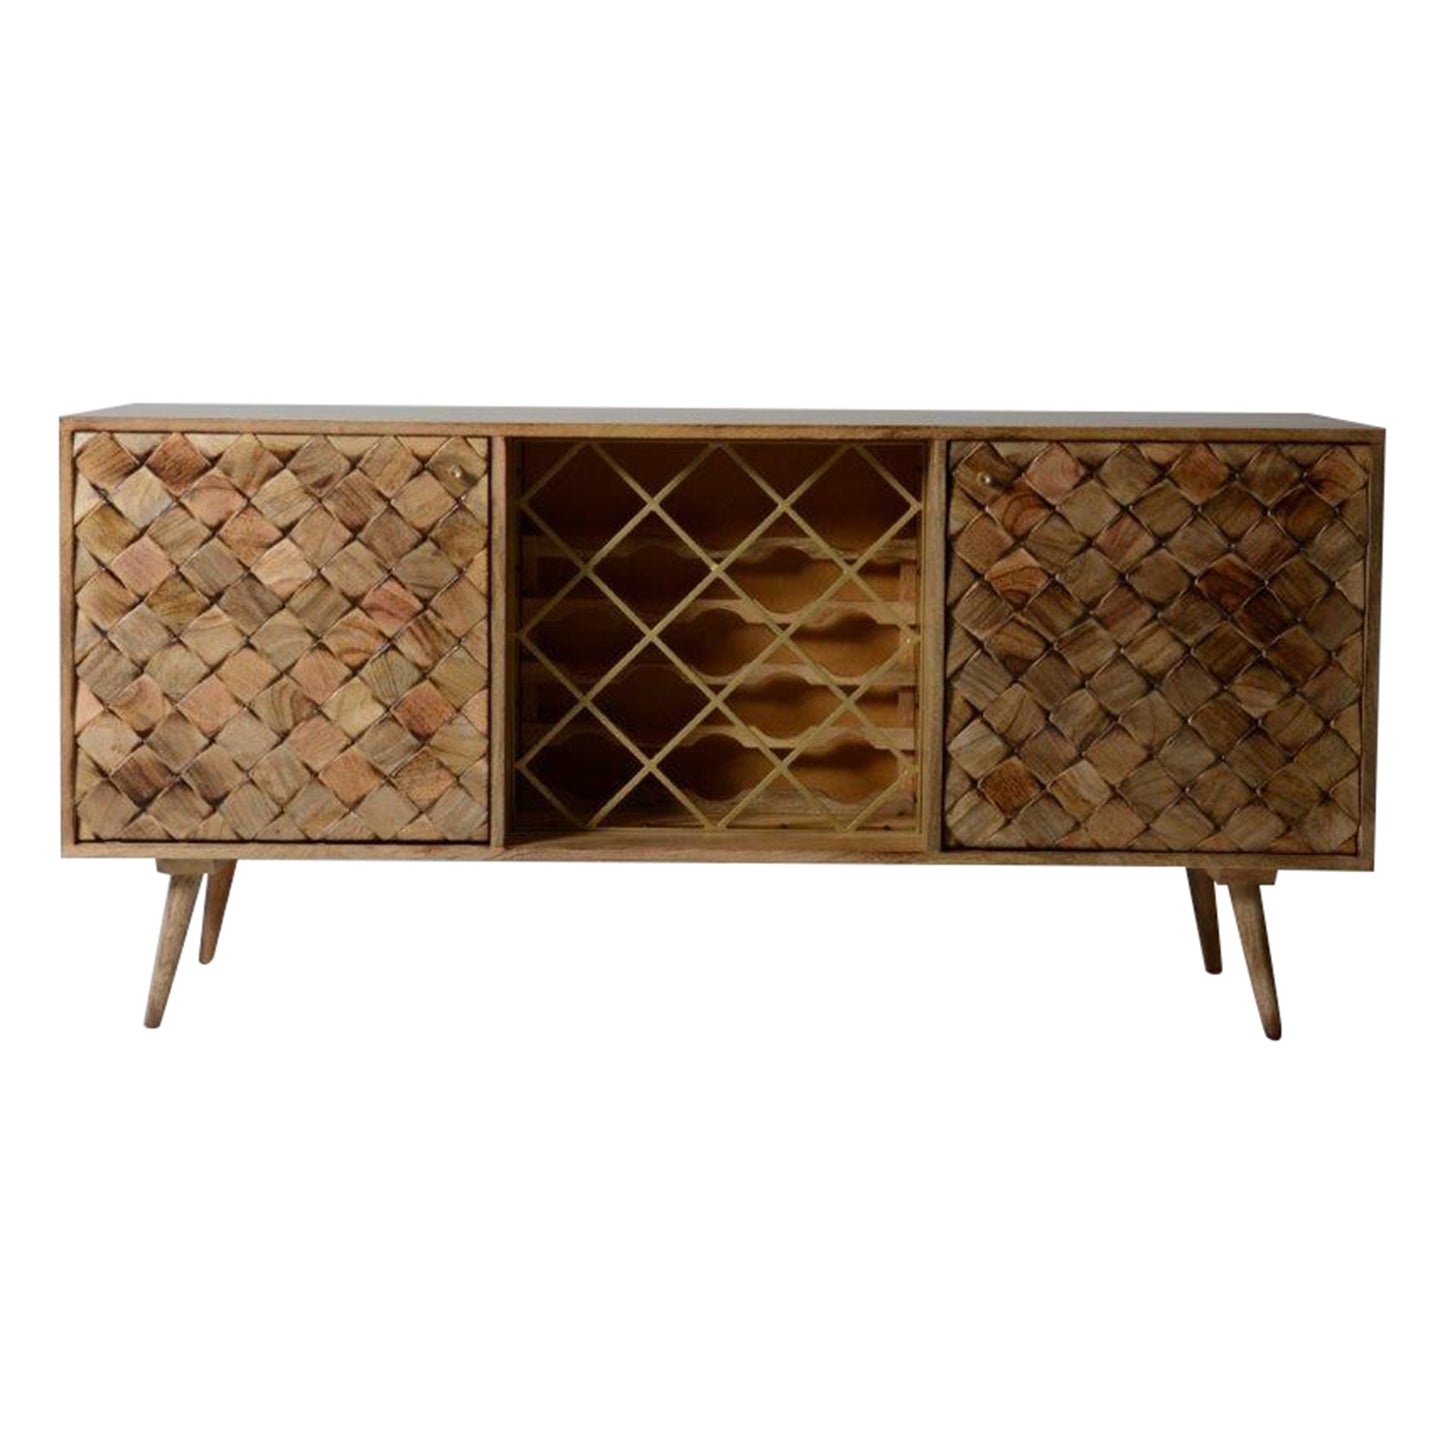 A Tuscany Wine Sideboard by Kikiathome.co.uk with a wine rack, perfect for interior decor.